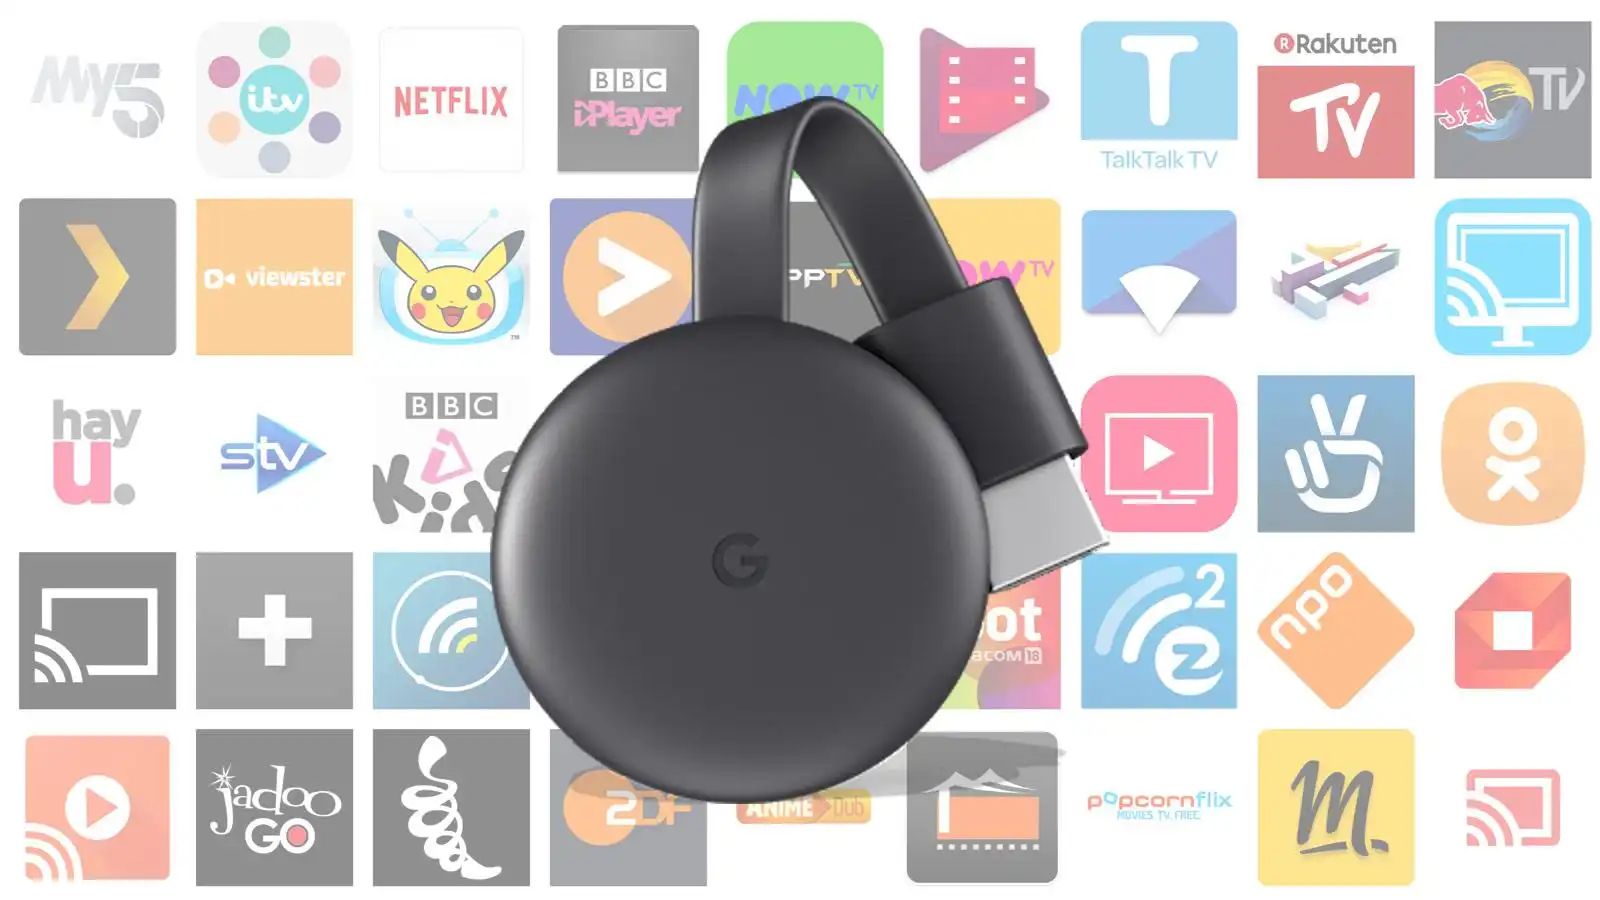 What Can You Do With Chromecast